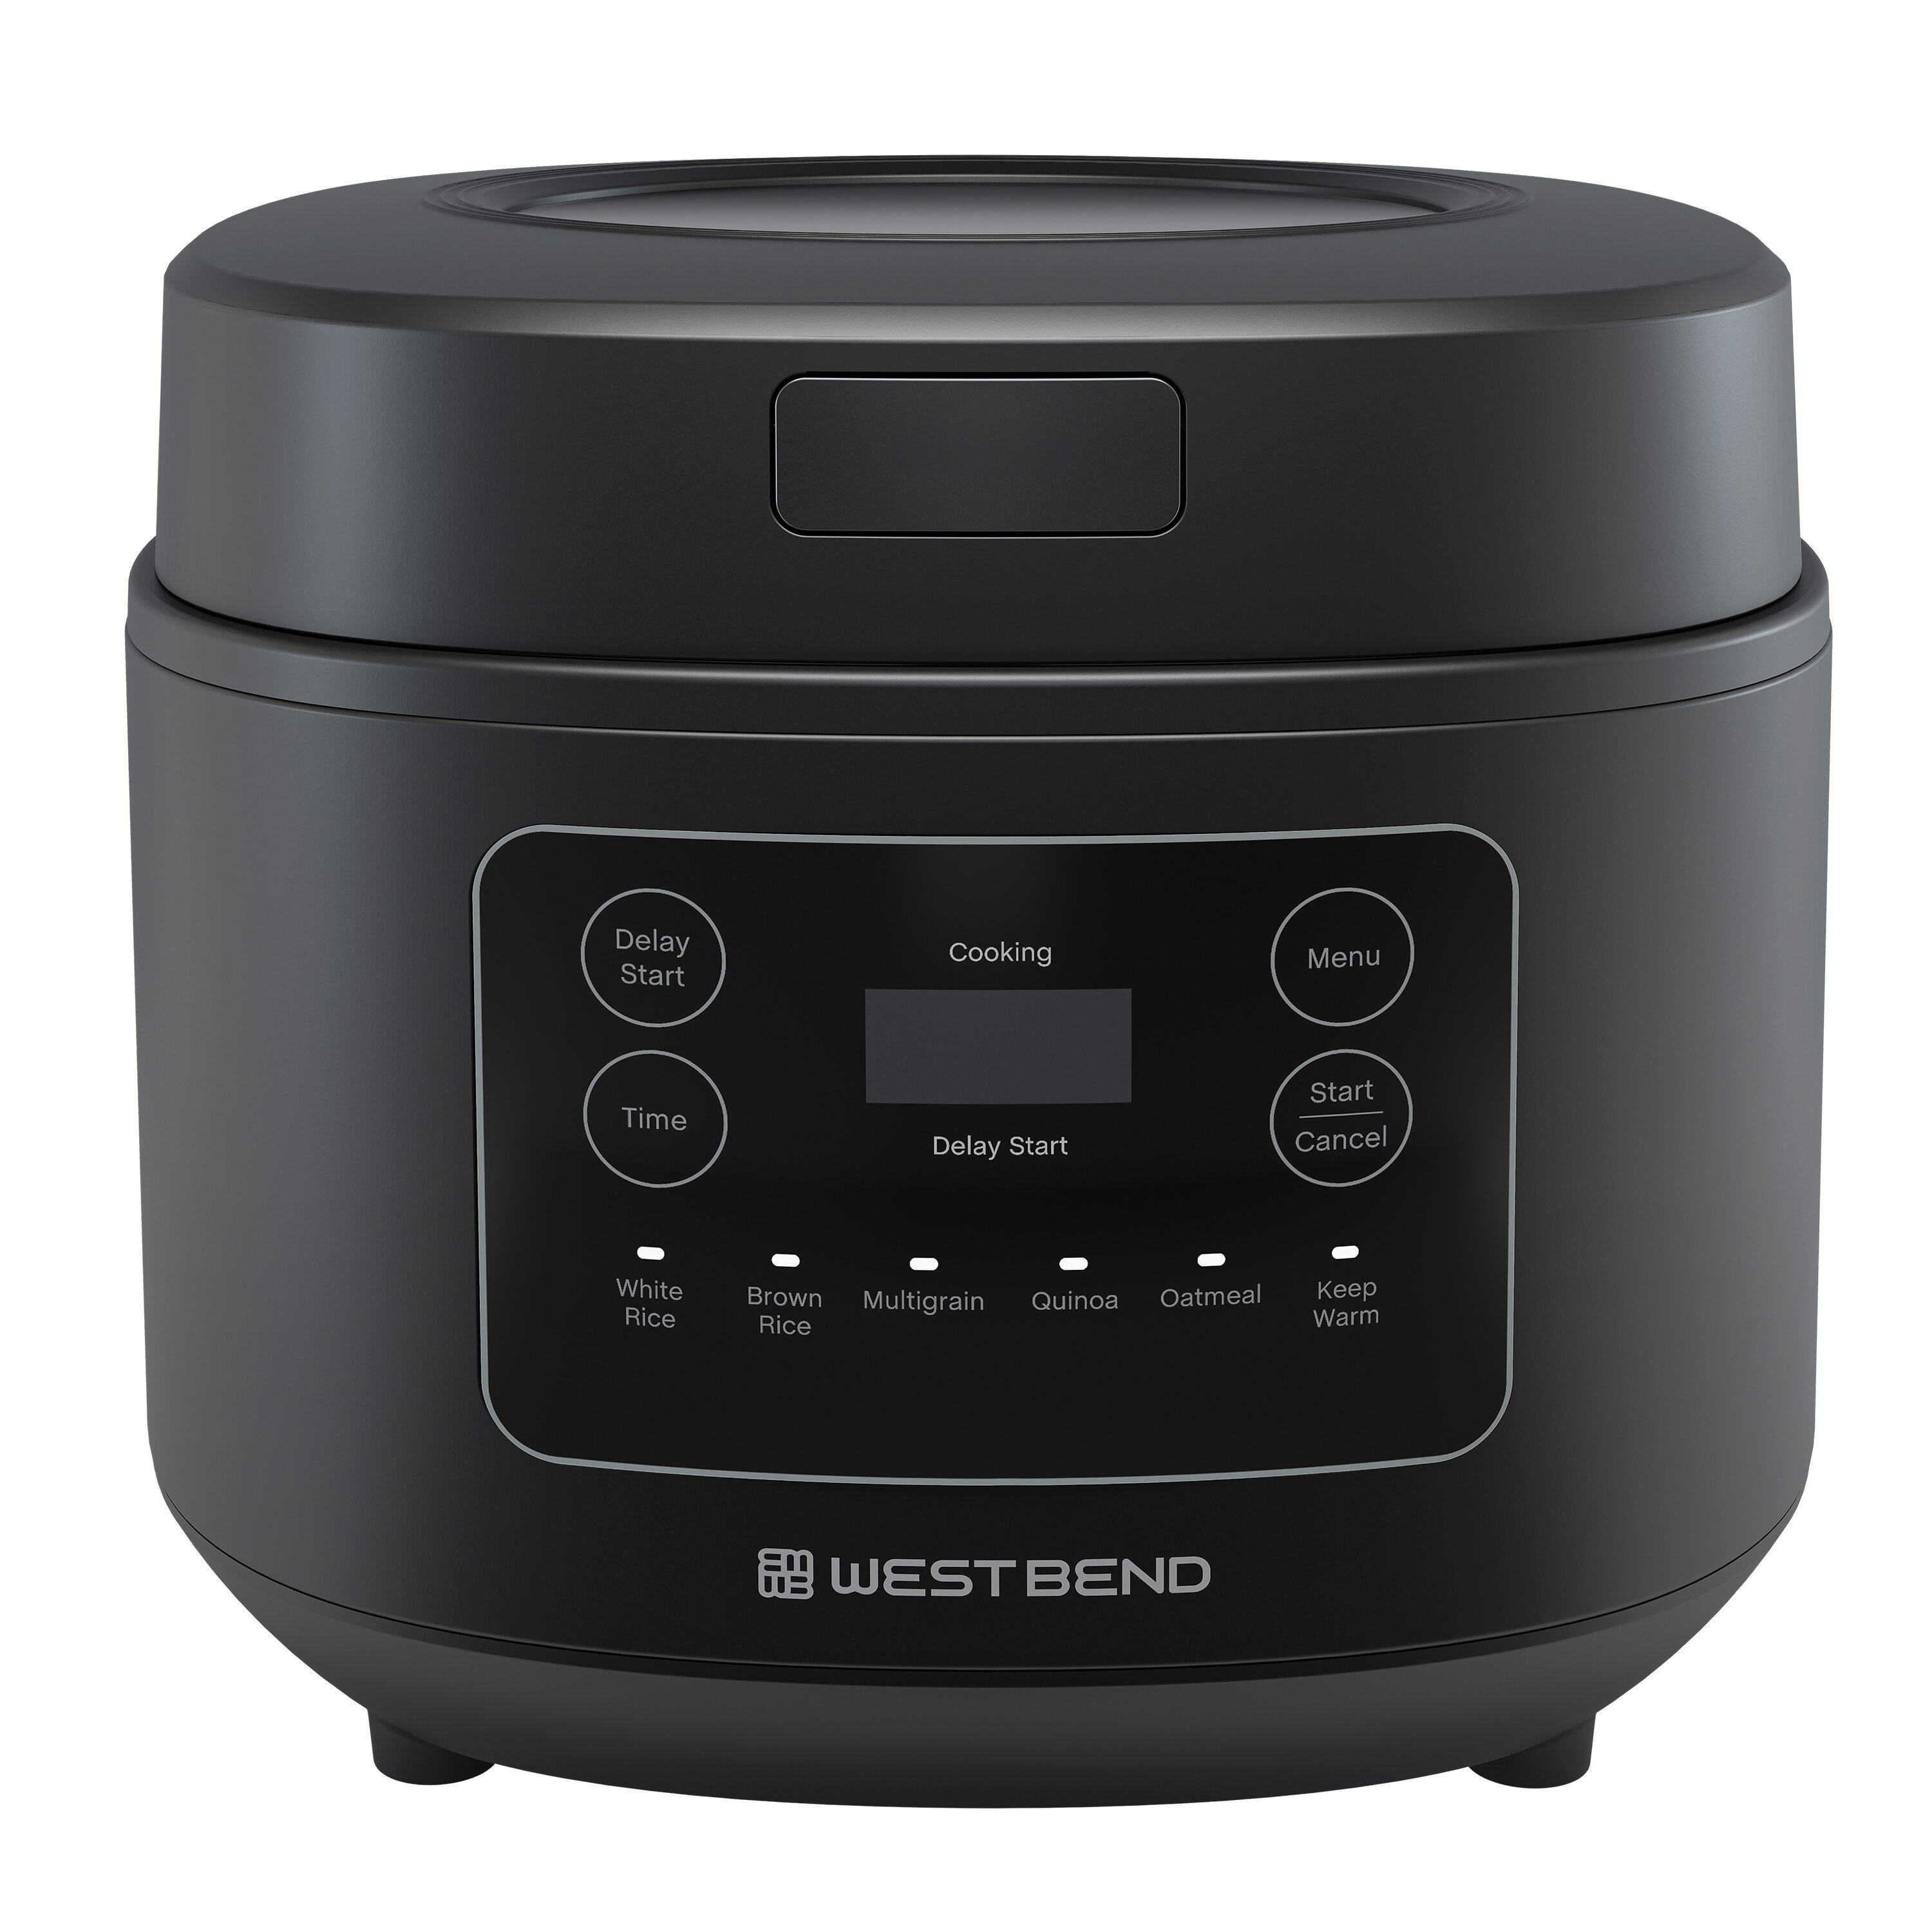 West Bend 12 Cups Programmable Residential Rice Cooker in the Rice Cookers  department at